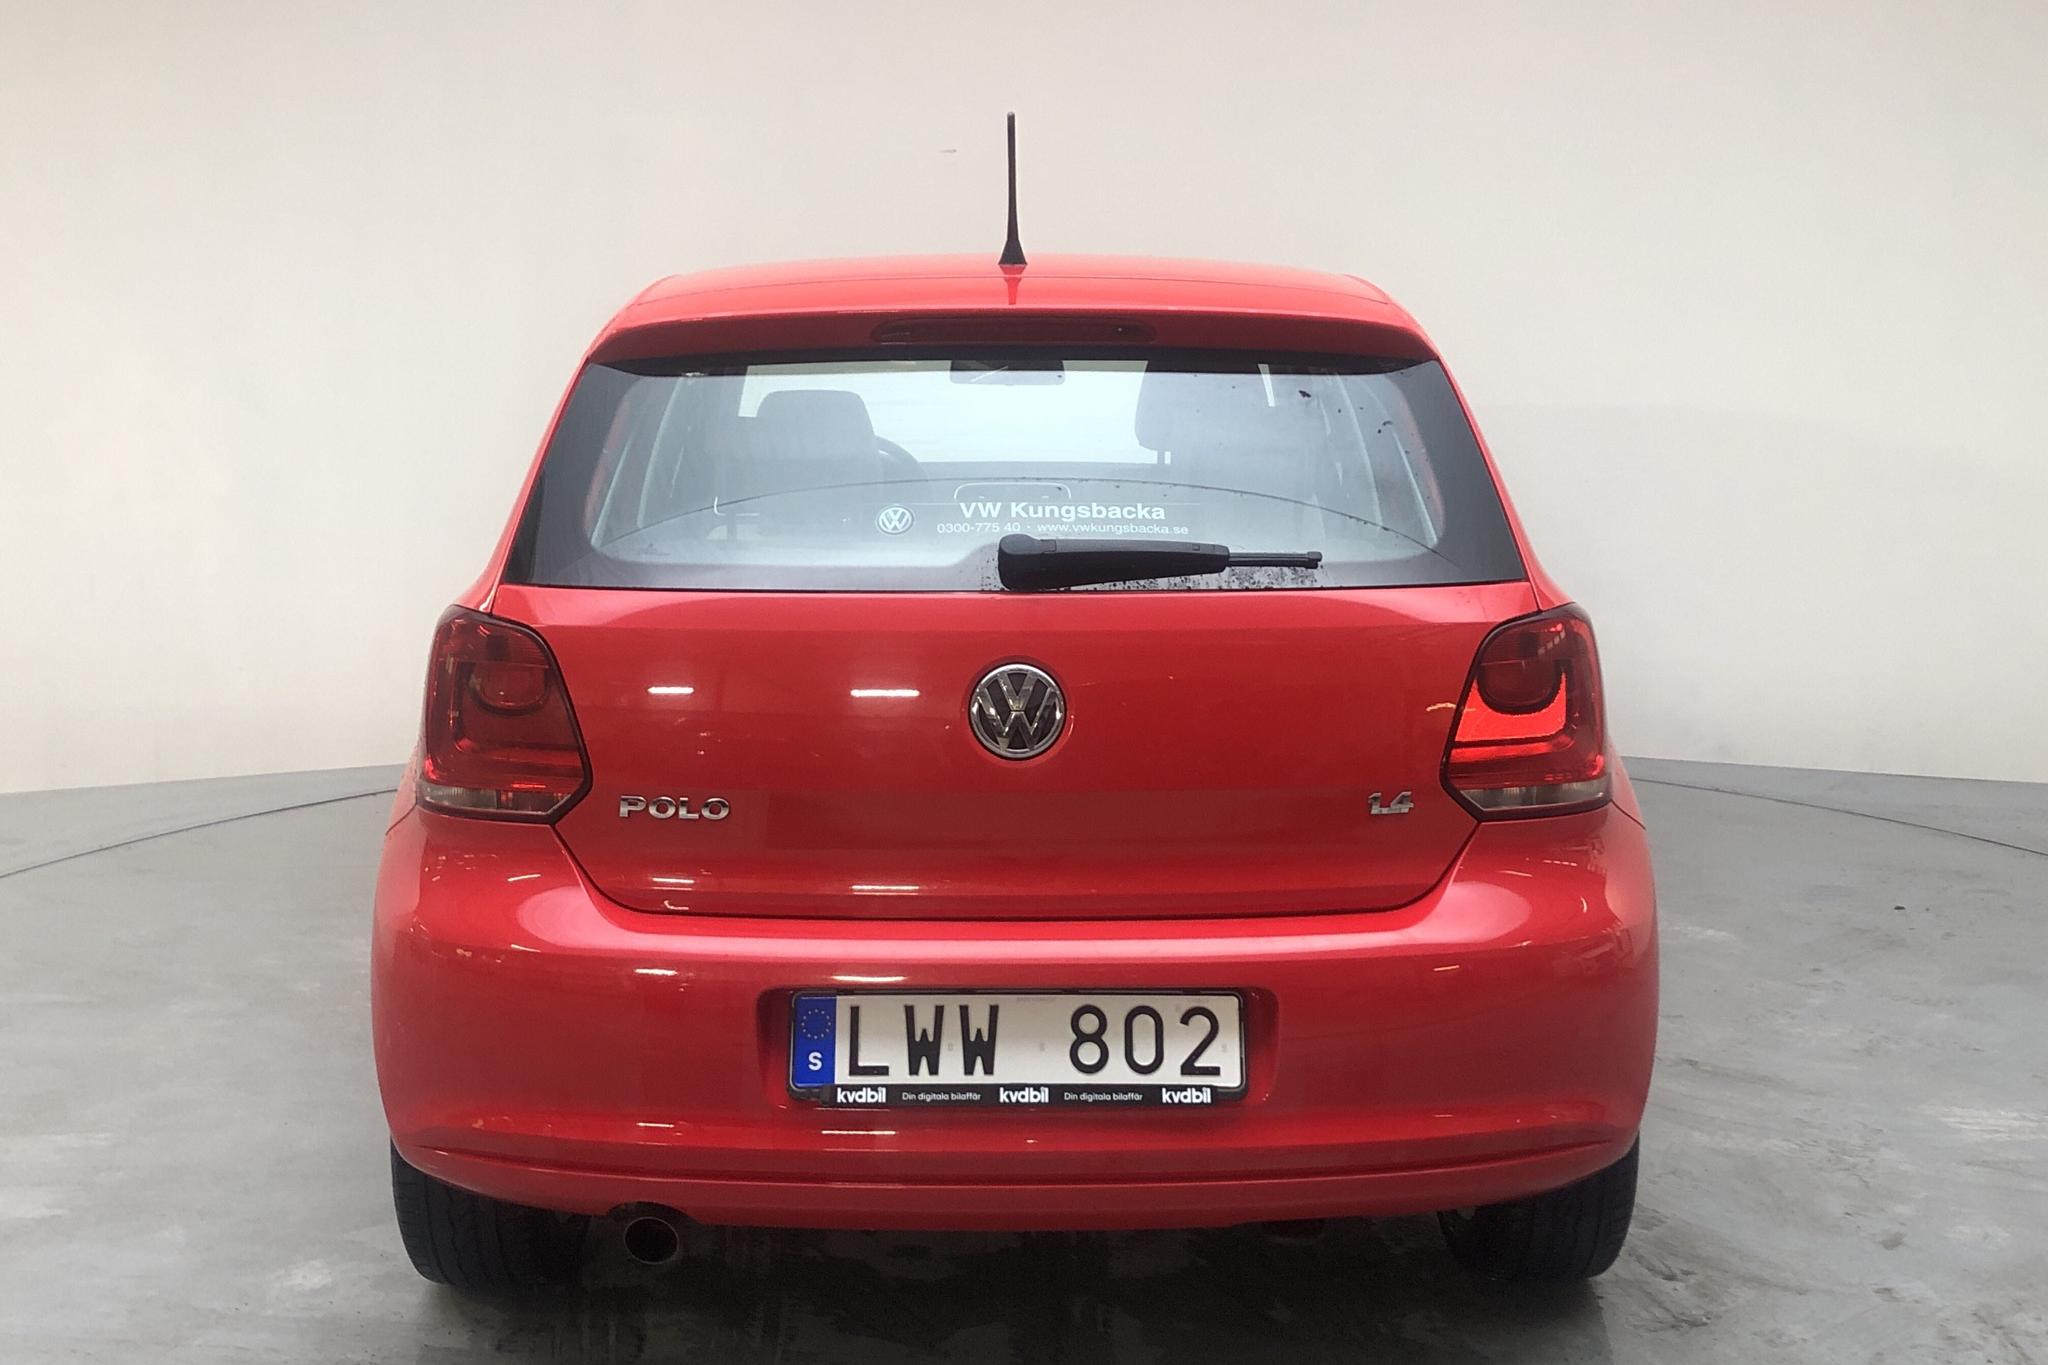 VW Polo 1.4 5dr (85hk) - 50 100 km - Automatic - red - 2012